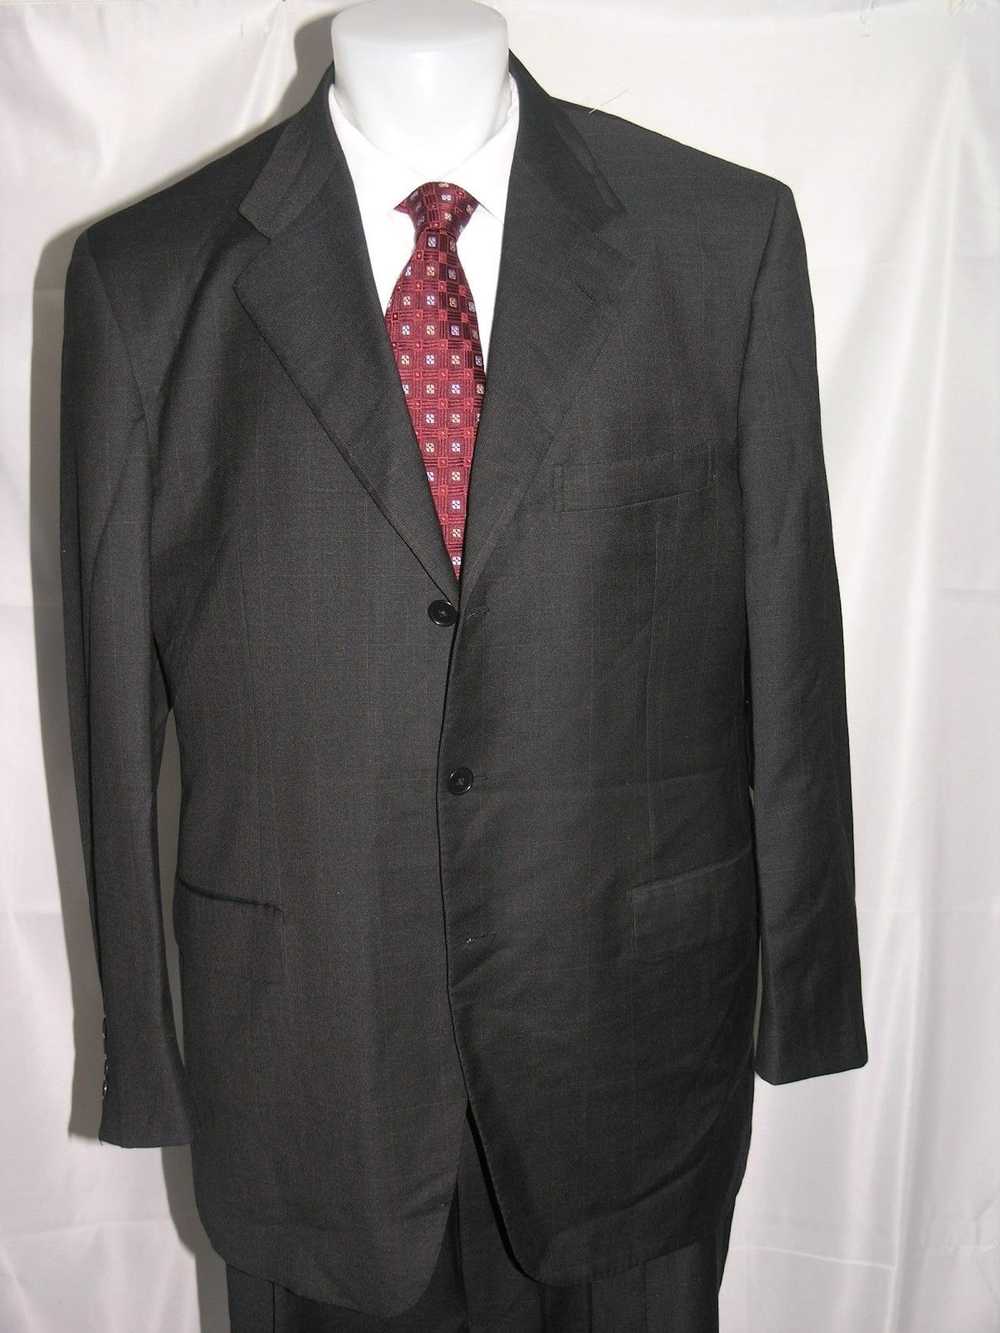 Davenza Roma Hand Tailored Three Button Suit 46L - image 3